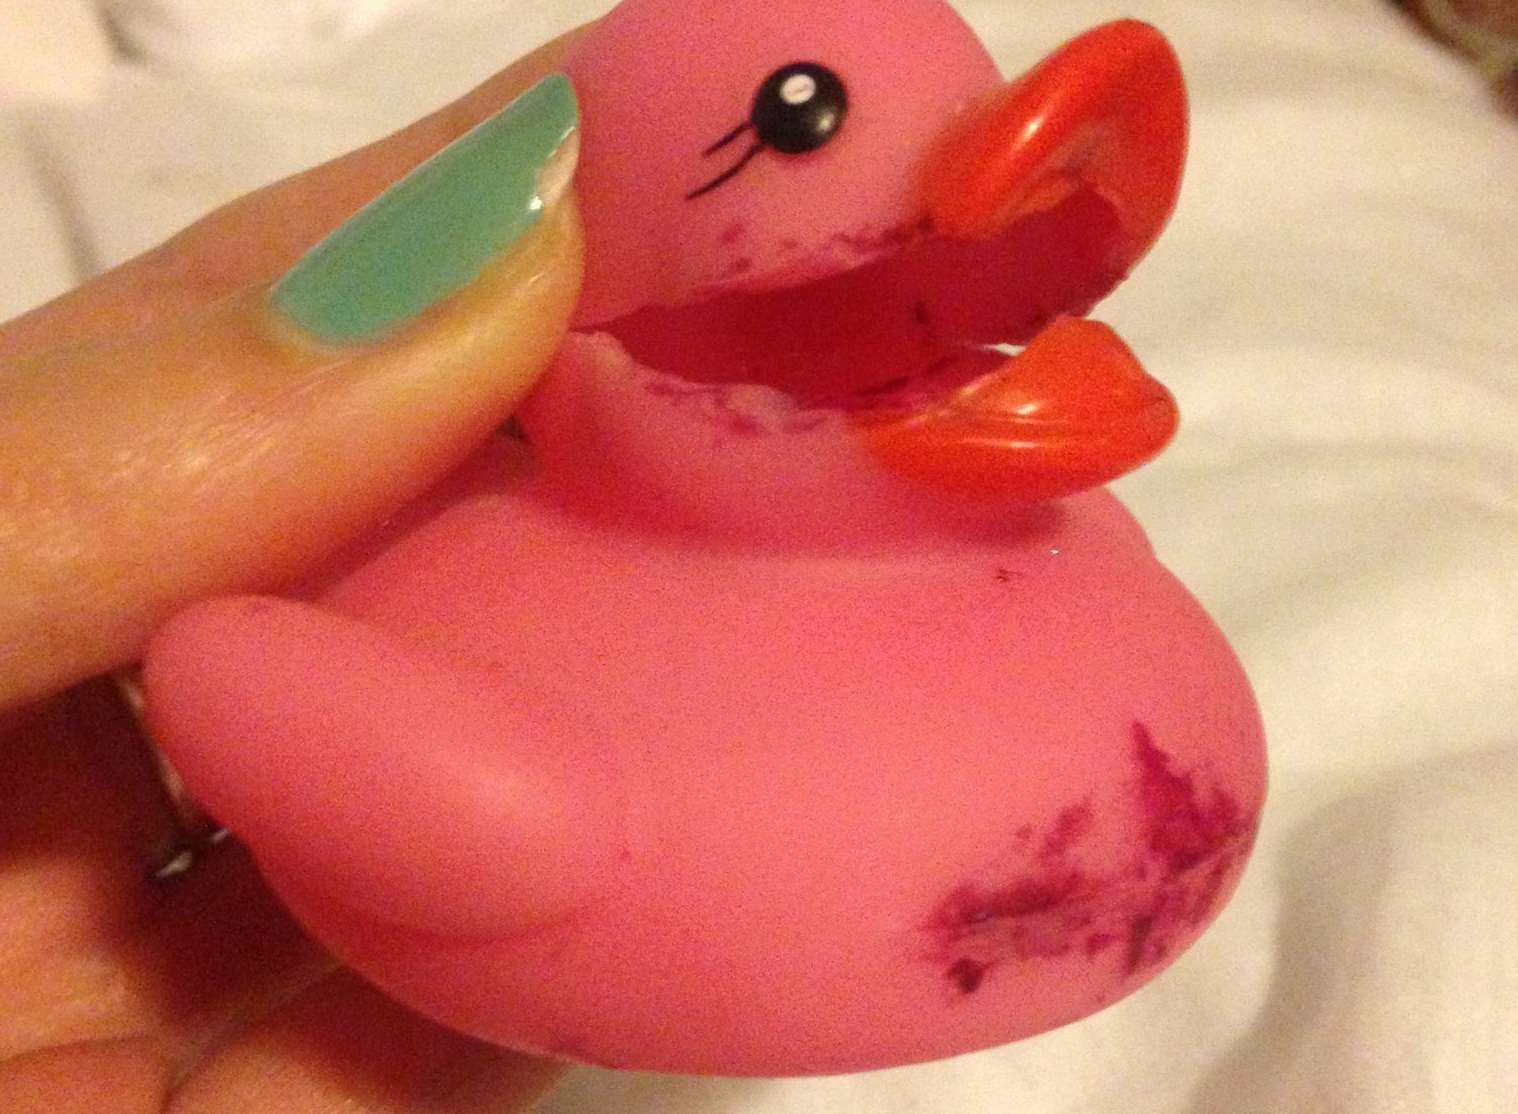 This duck looks 'mutilated'. Picture: SWNS